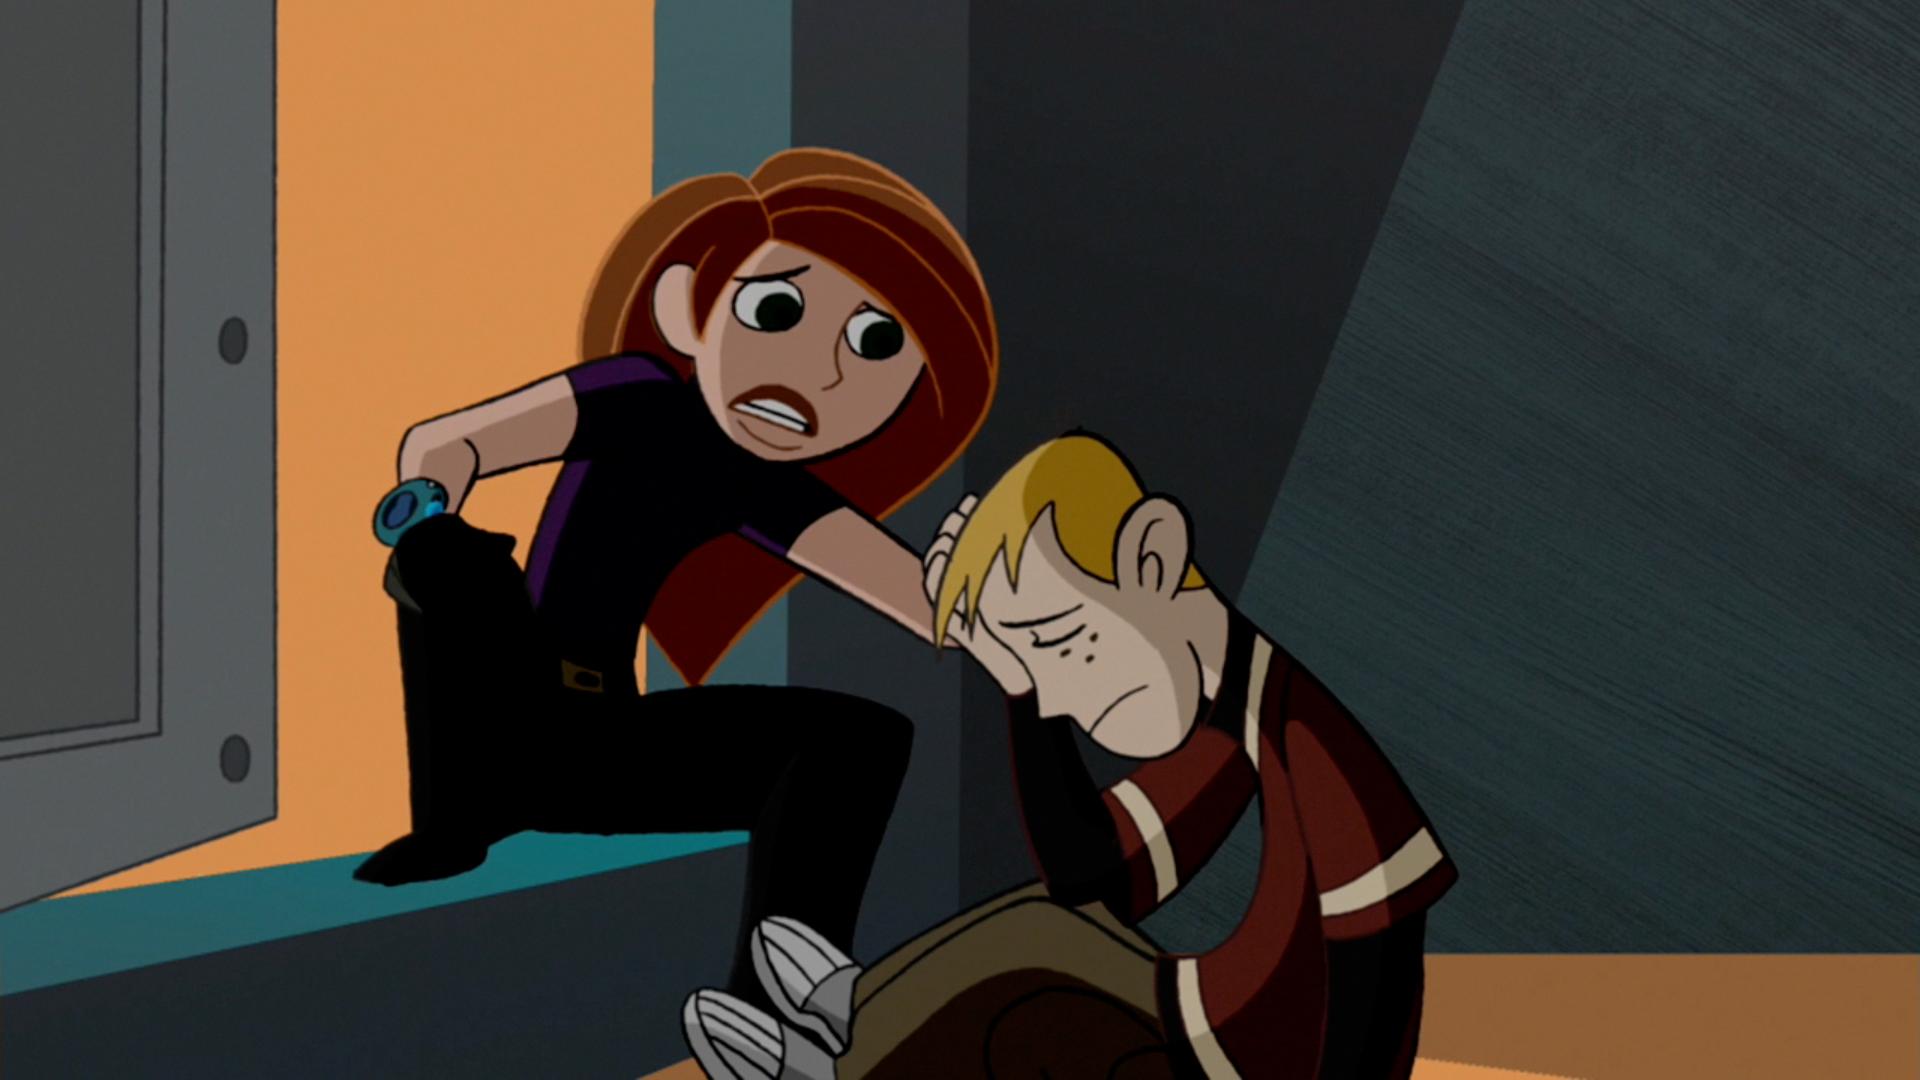 kim possible gay porn pictures